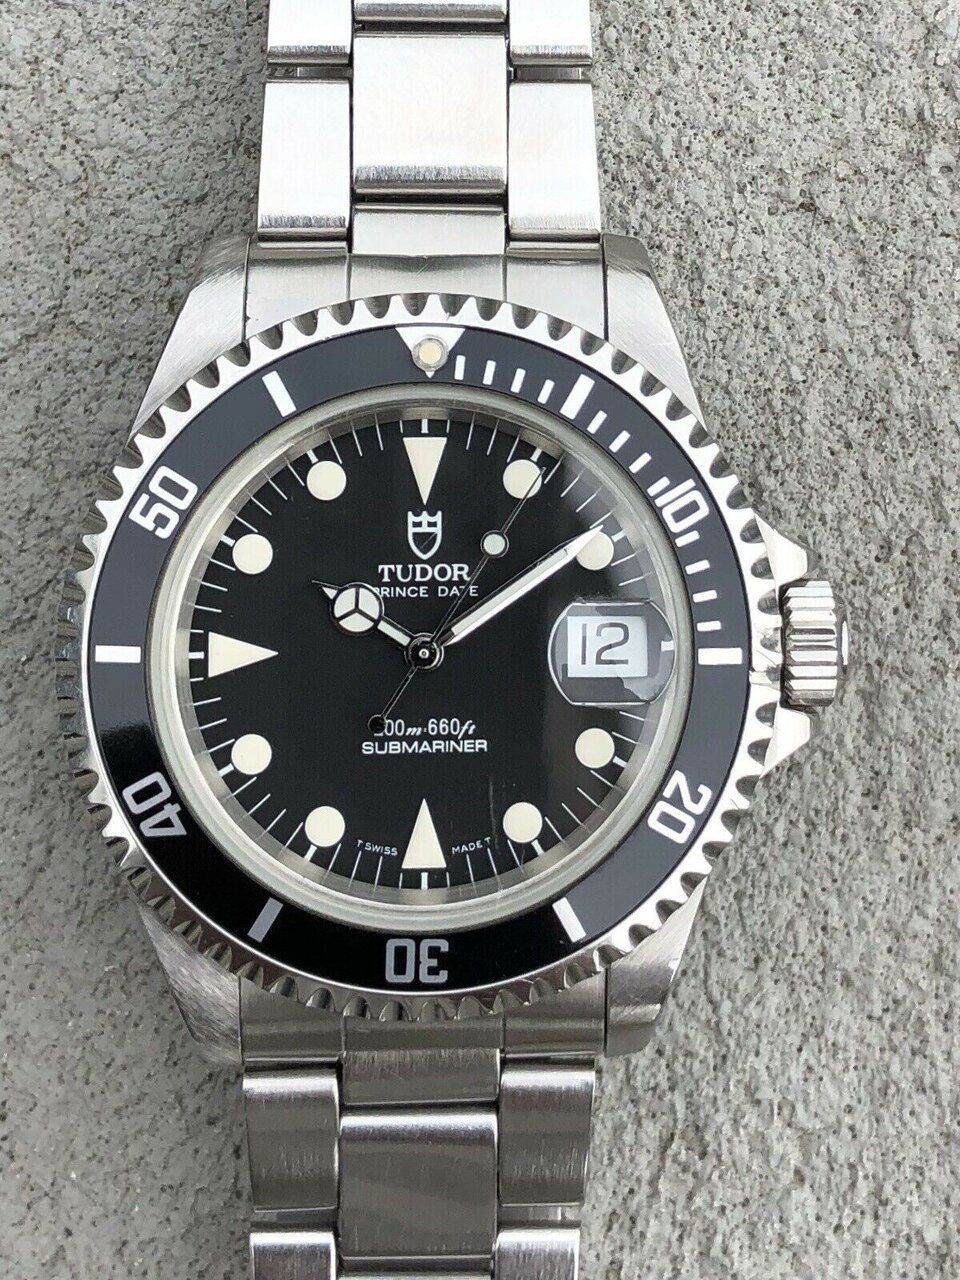 Tudor+Submariner+79190+-+1997+Box+and+Papers+Watch+Vault+(1).jpg